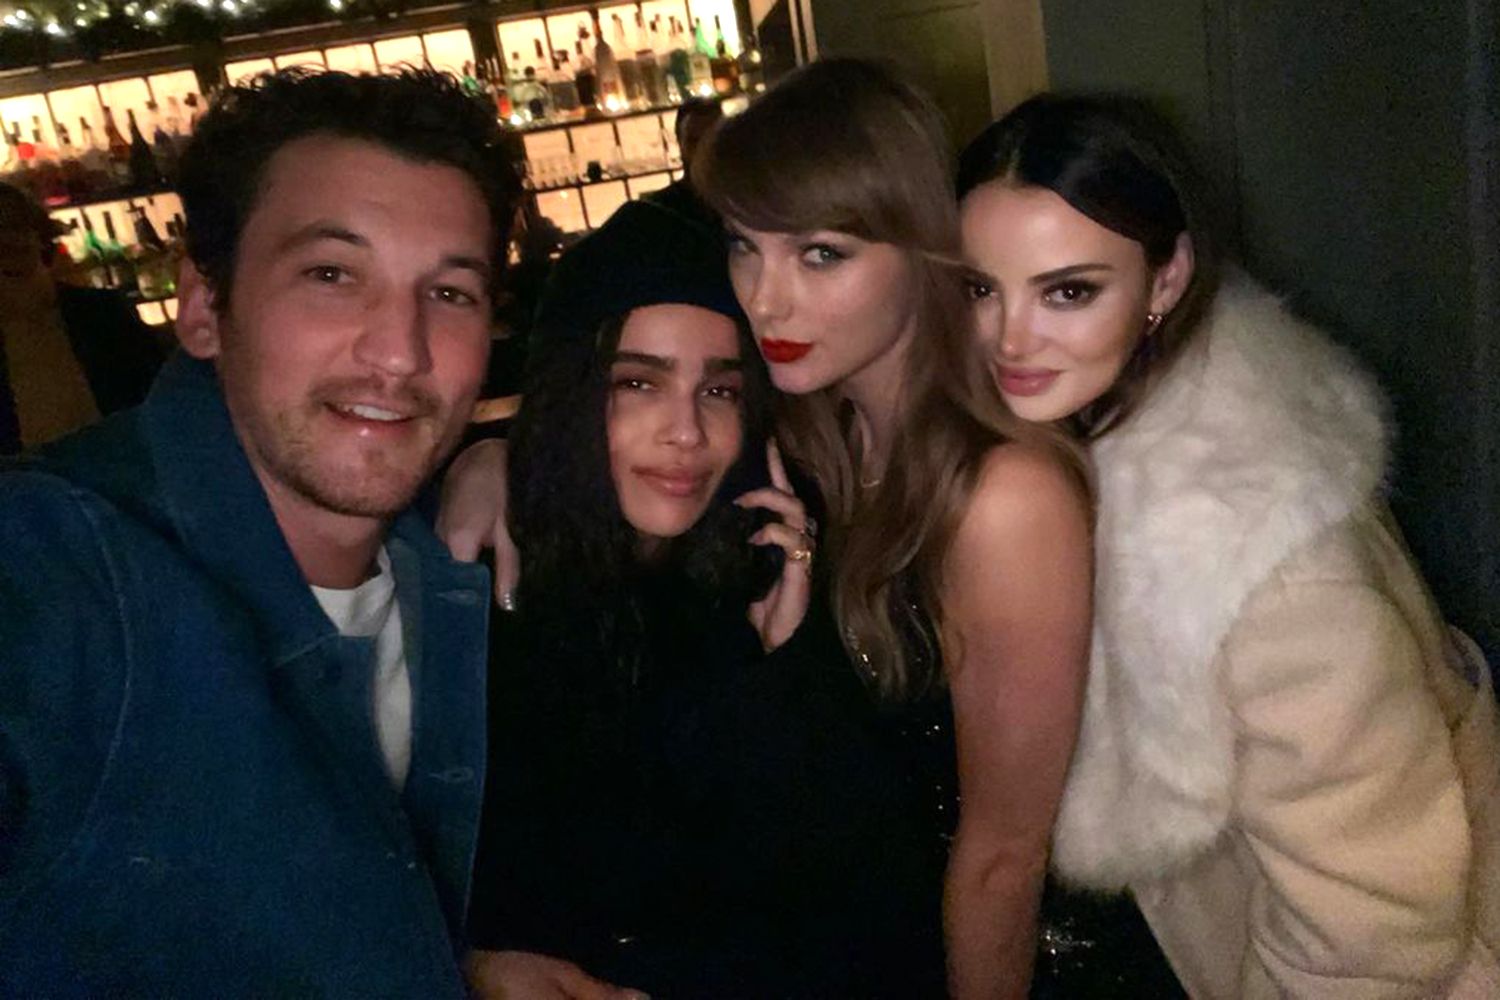 Miles Teller Shares Behind the Scenes Pics From Taylor Swiftâs Birthday Party with ZoÃ« Kravitz, Blake Lively and Gigi Hadid